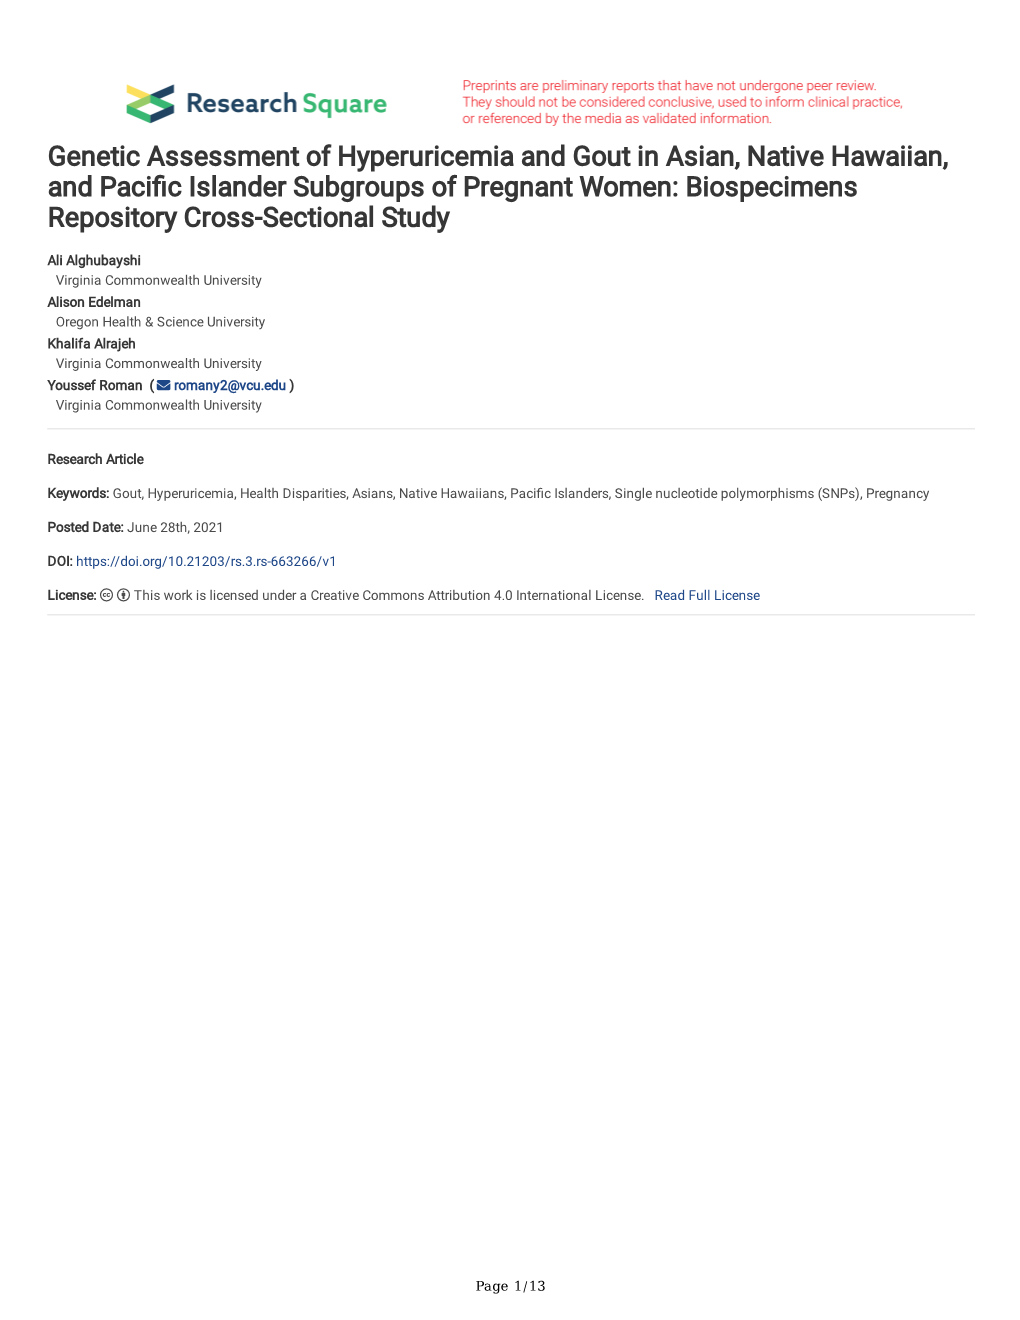 Genetic Assessment of Hyperuricemia and Gout in Asian, Native Hawaiian, and Pacifc Islander Subgroups of Pregnant Women: Biospecimens Repository Cross-Sectional Study